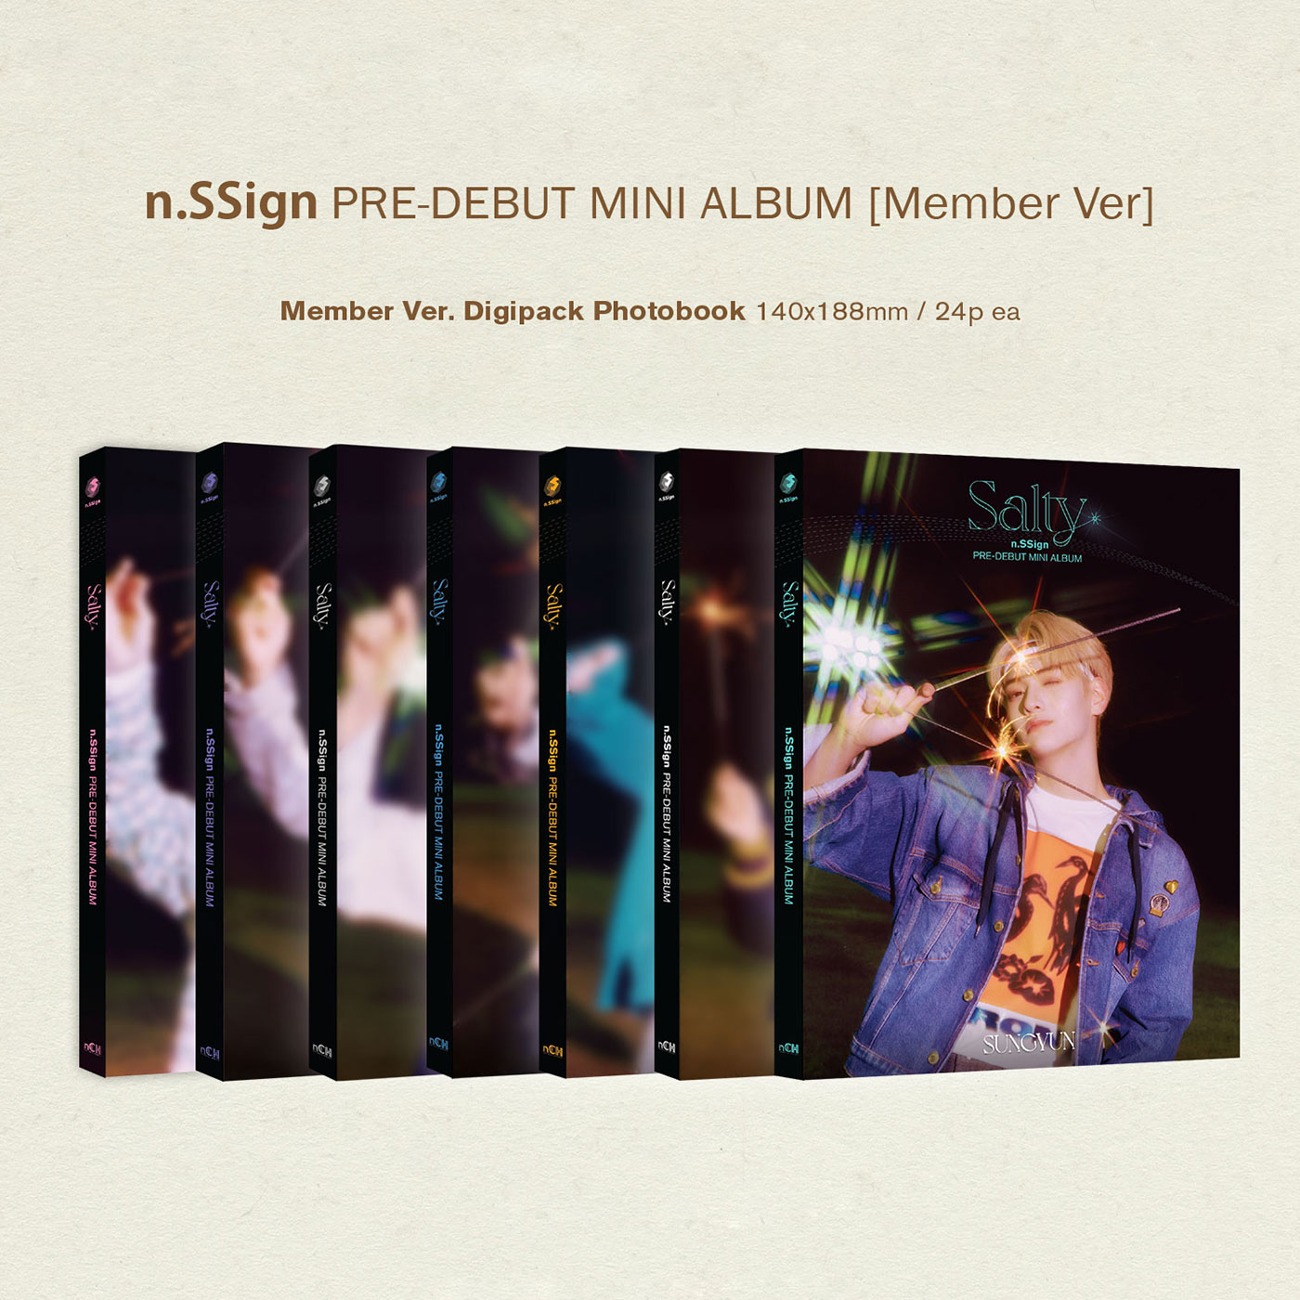 n.SSign - Salty : PRE-DEBUT MINI ALBUM - official Kgoods